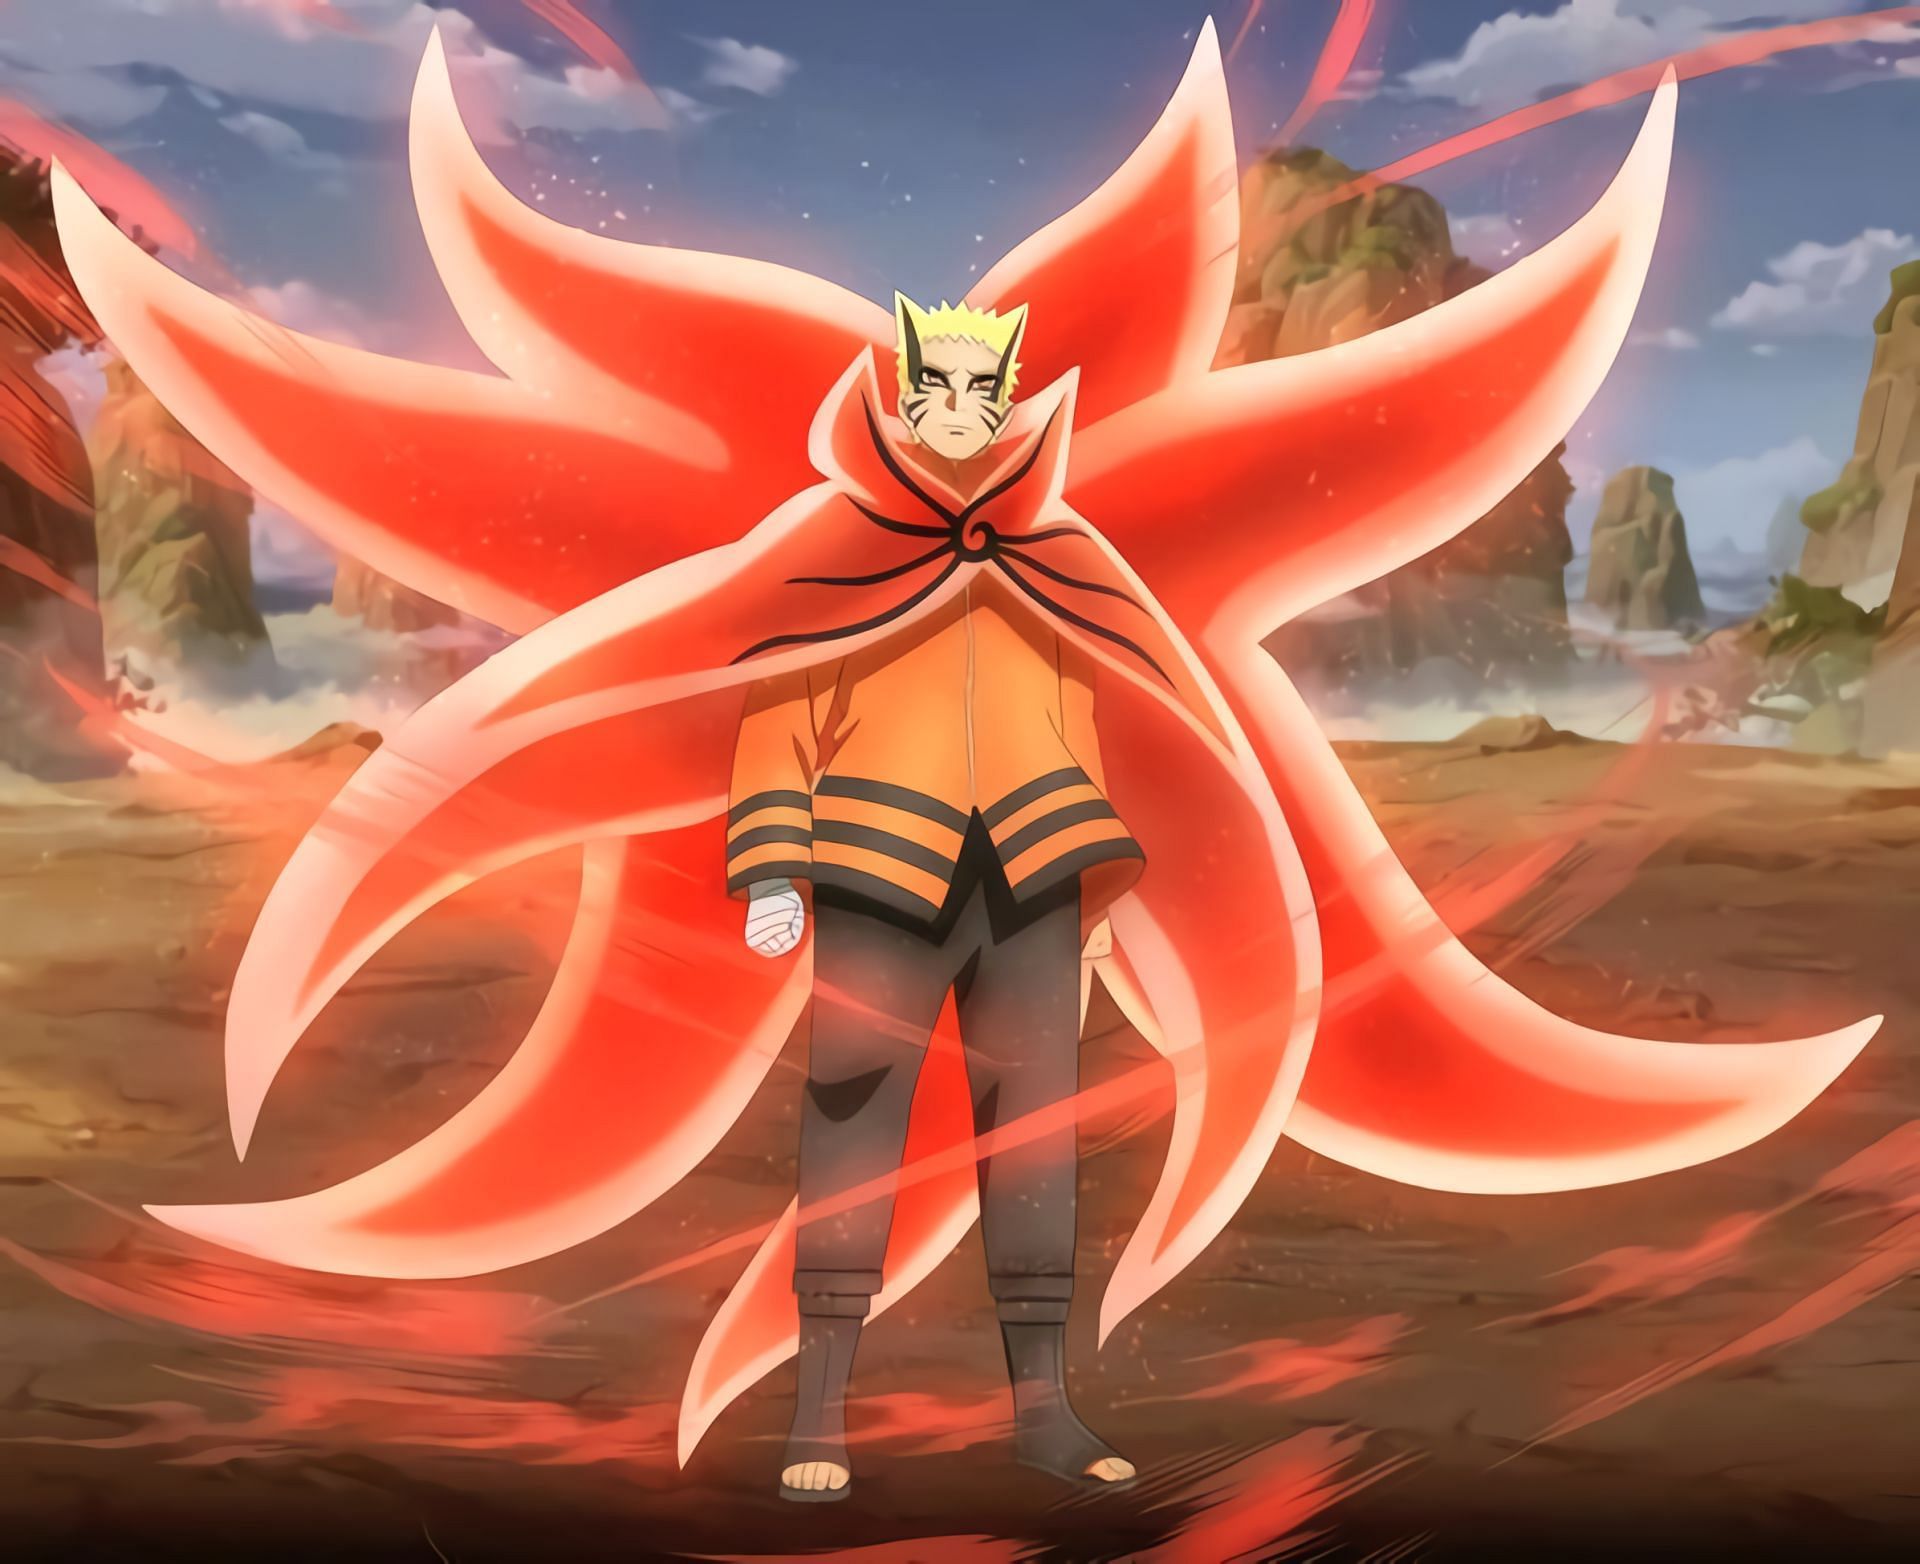 Is the nine tailed fox real? - Quora